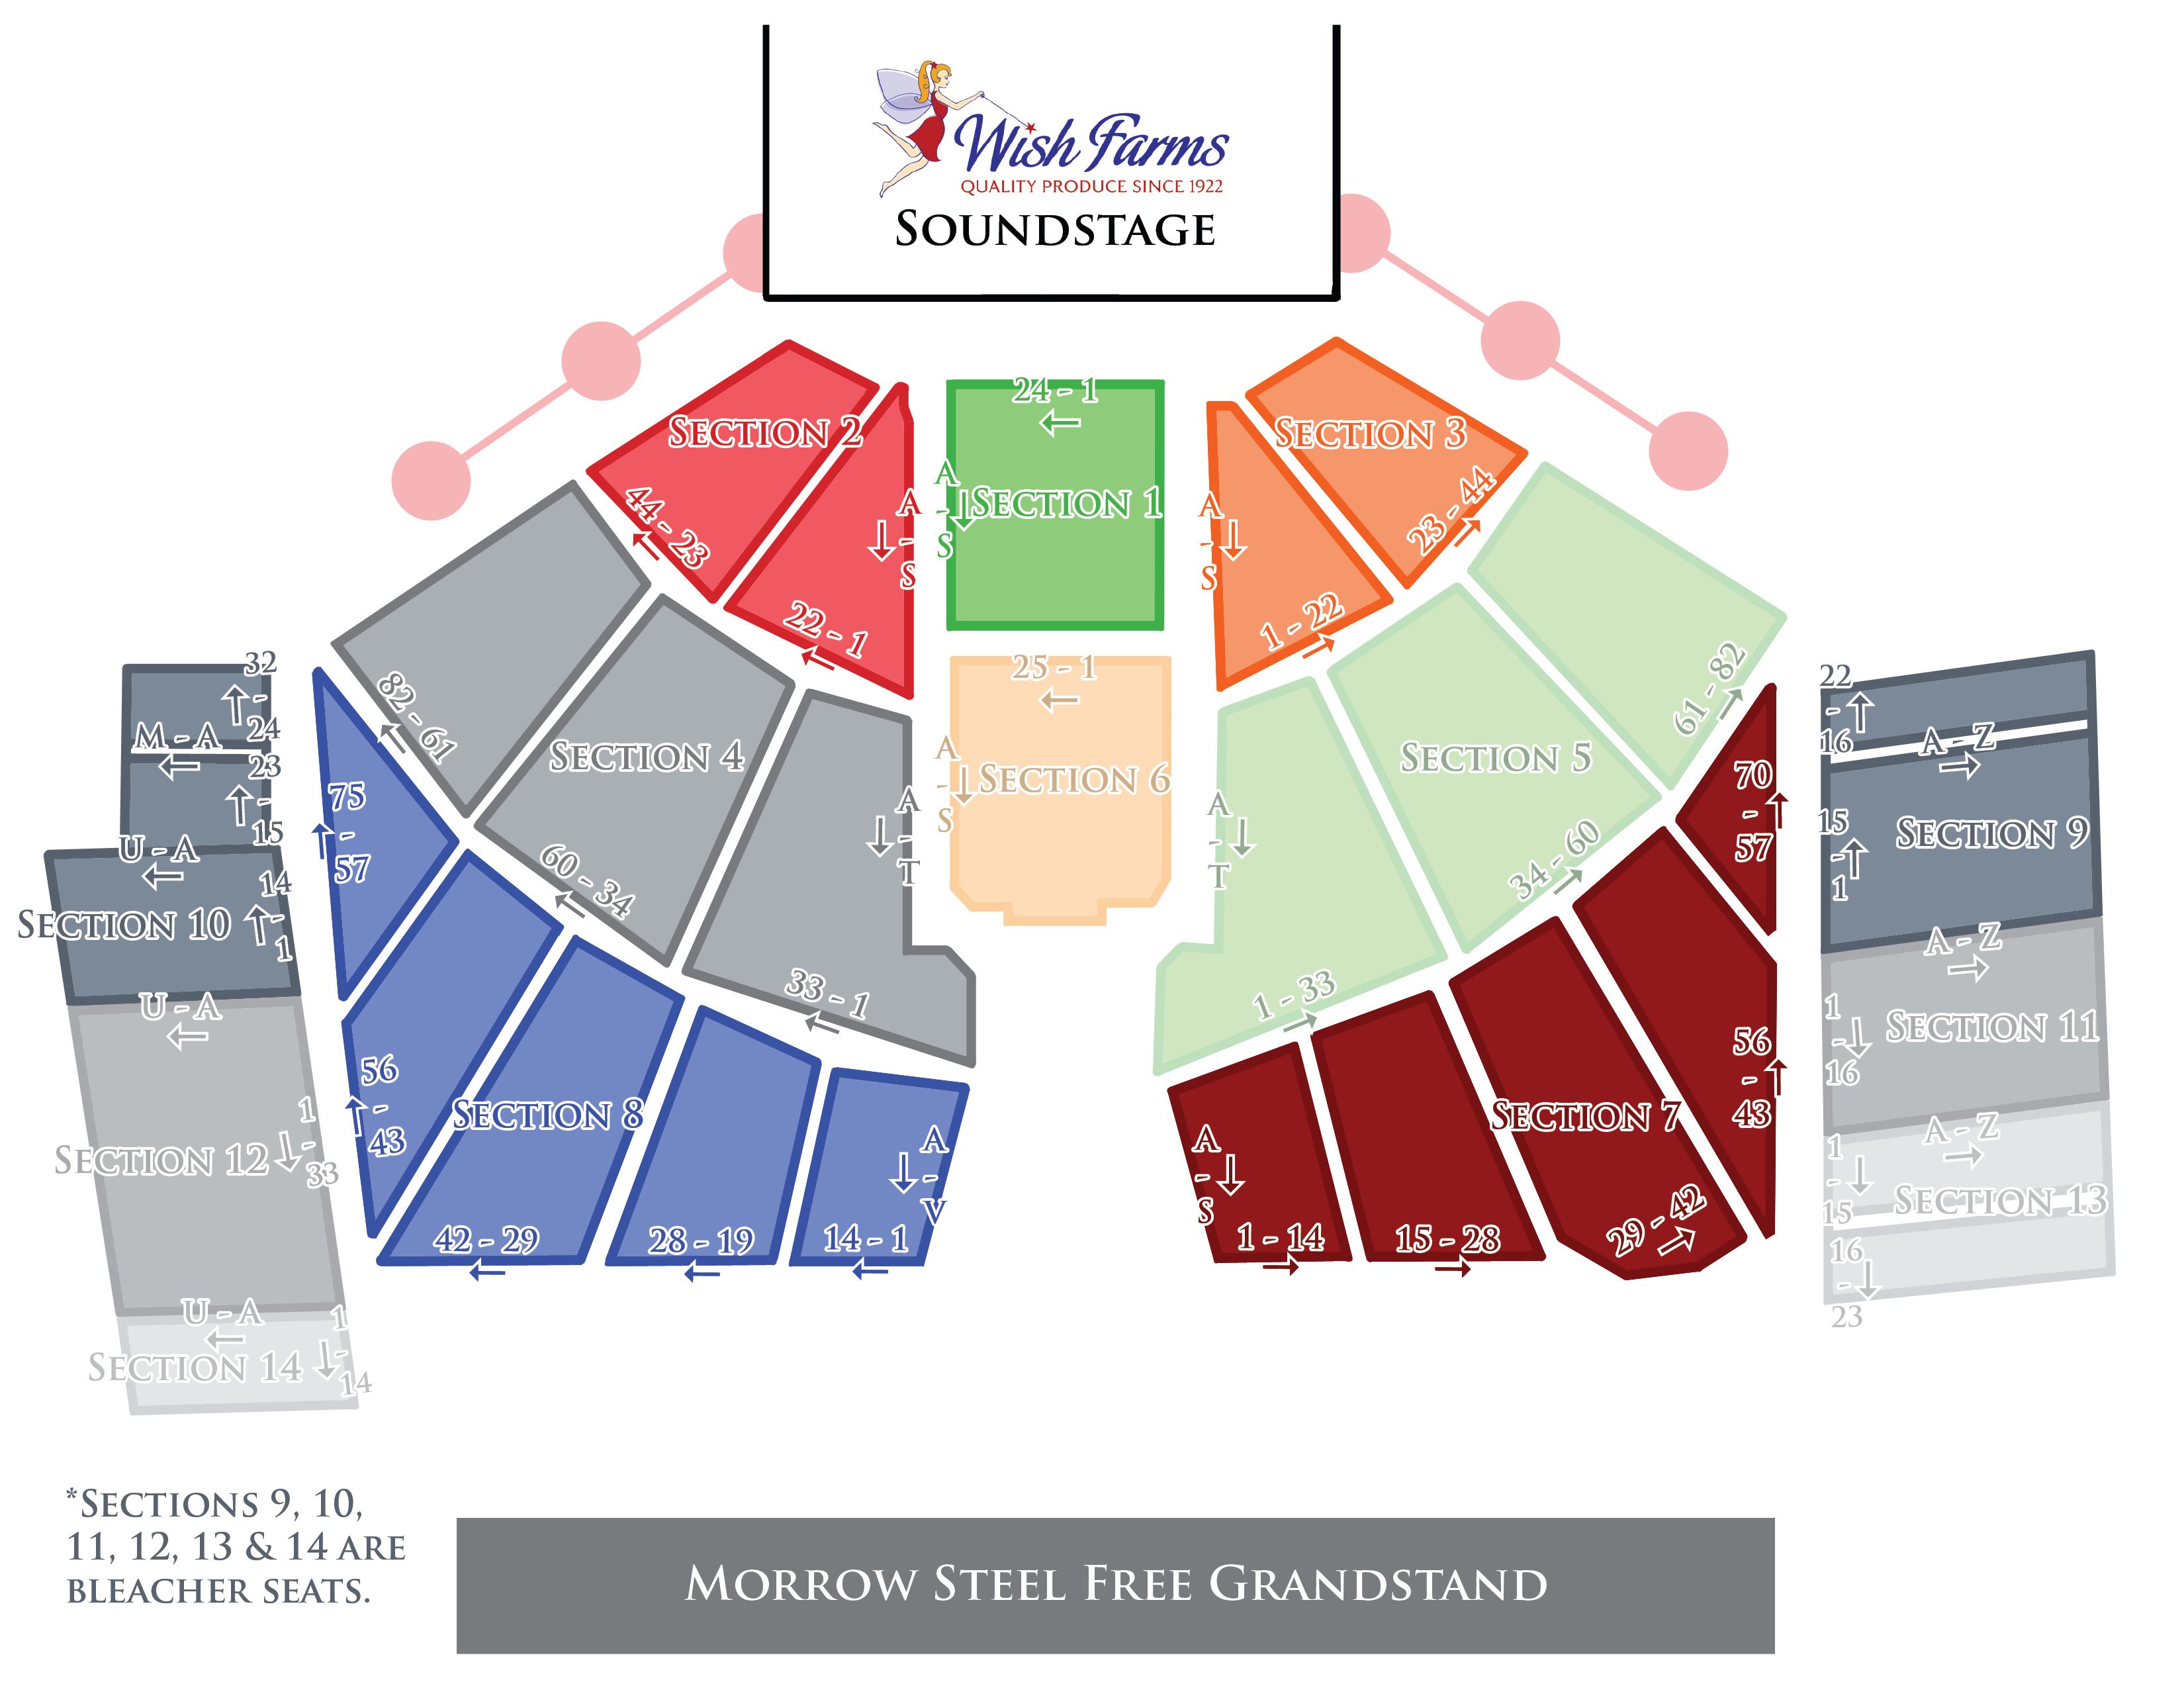 Van Wezel Seating Chart With Seat Numbers